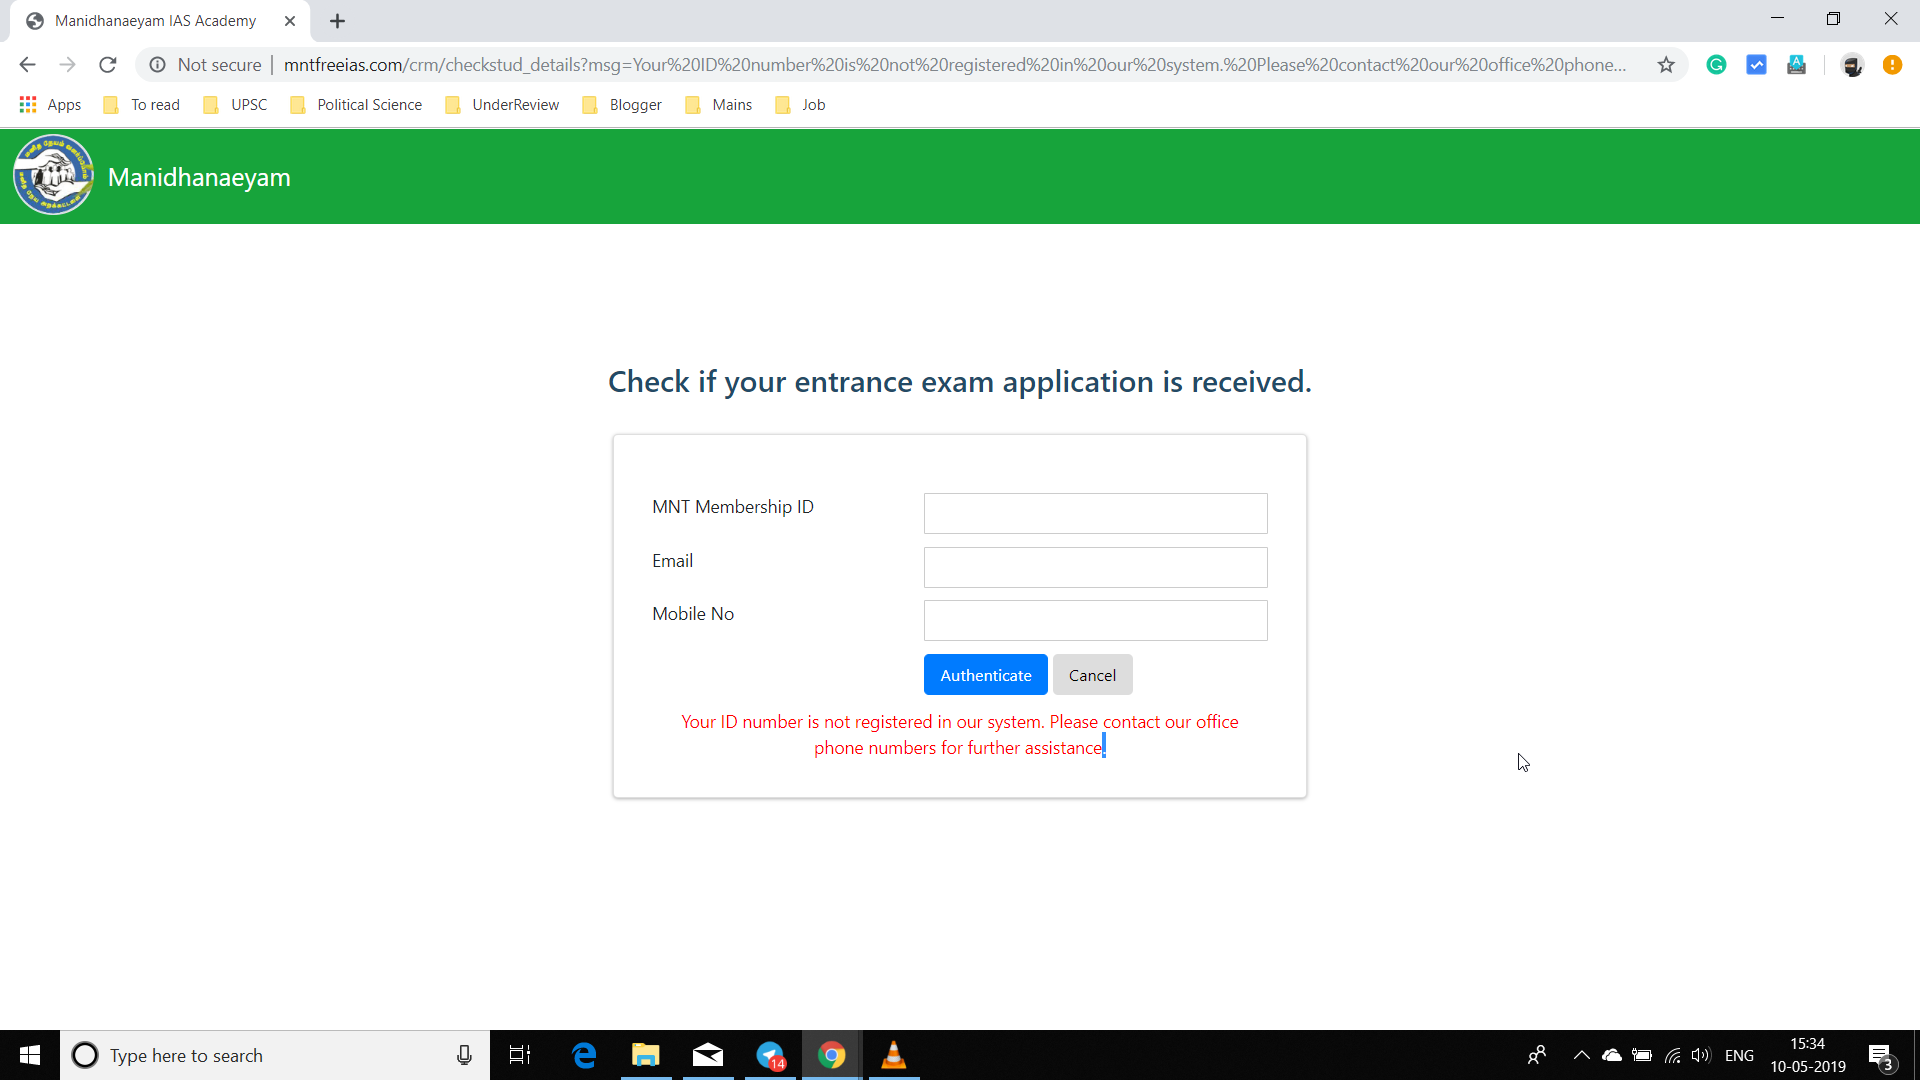 How to Deal with Problems while Applying for Manidhaneyam Step 2C